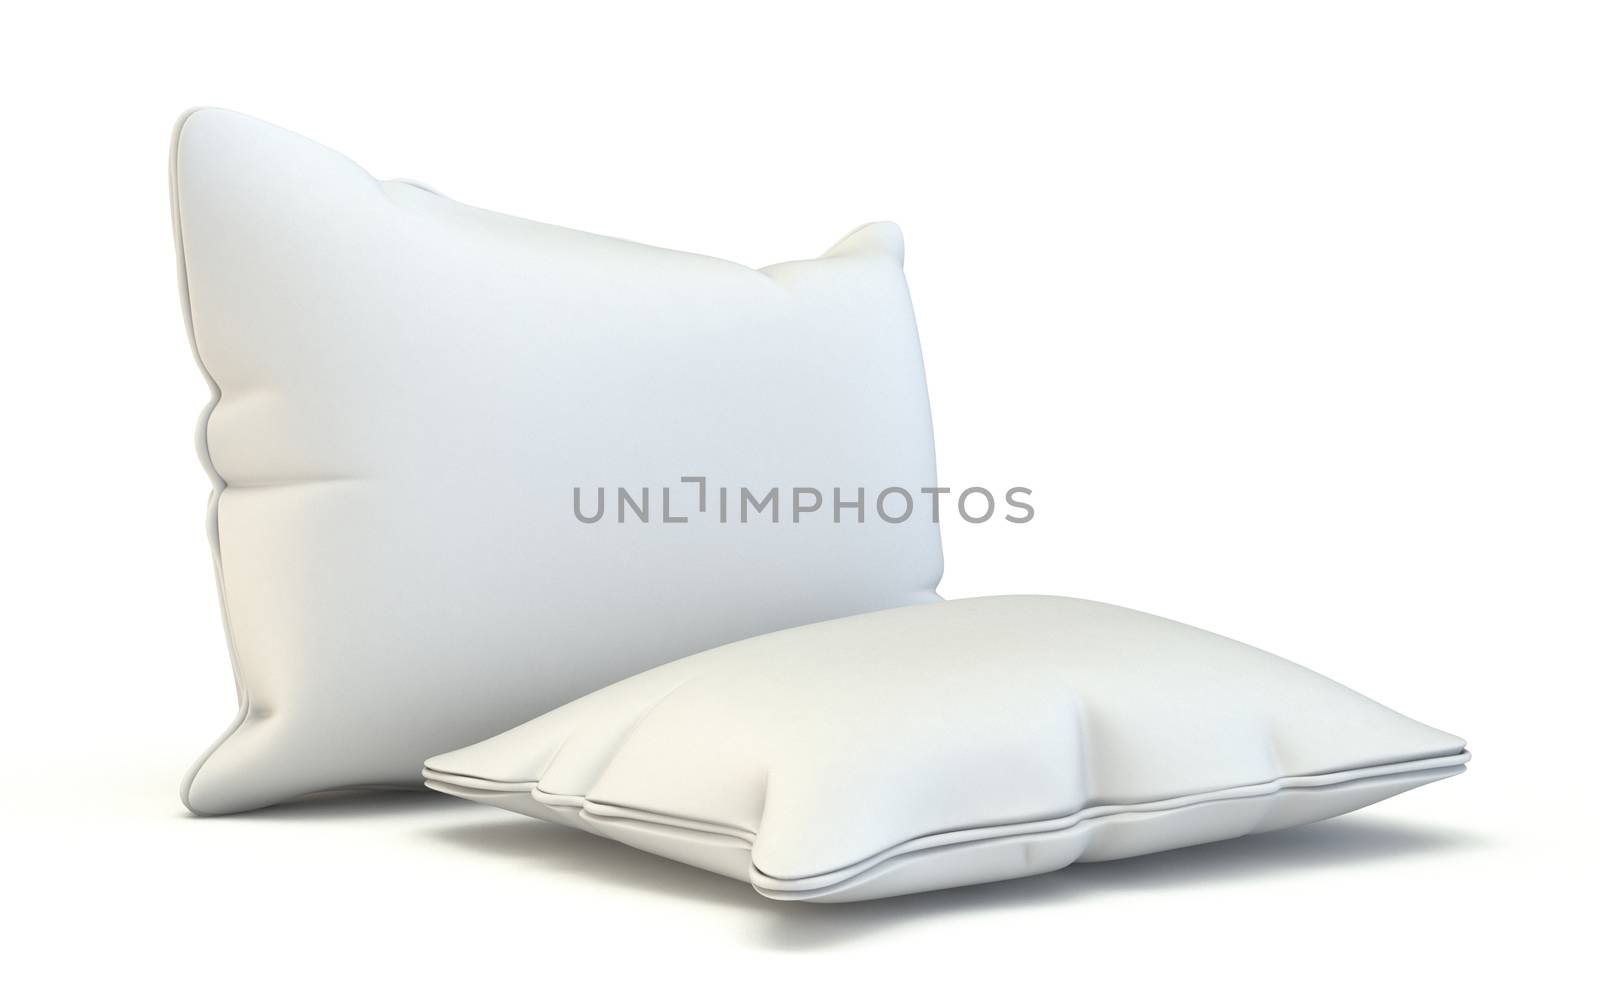 Square pillows 3D render illustration isolated on white background